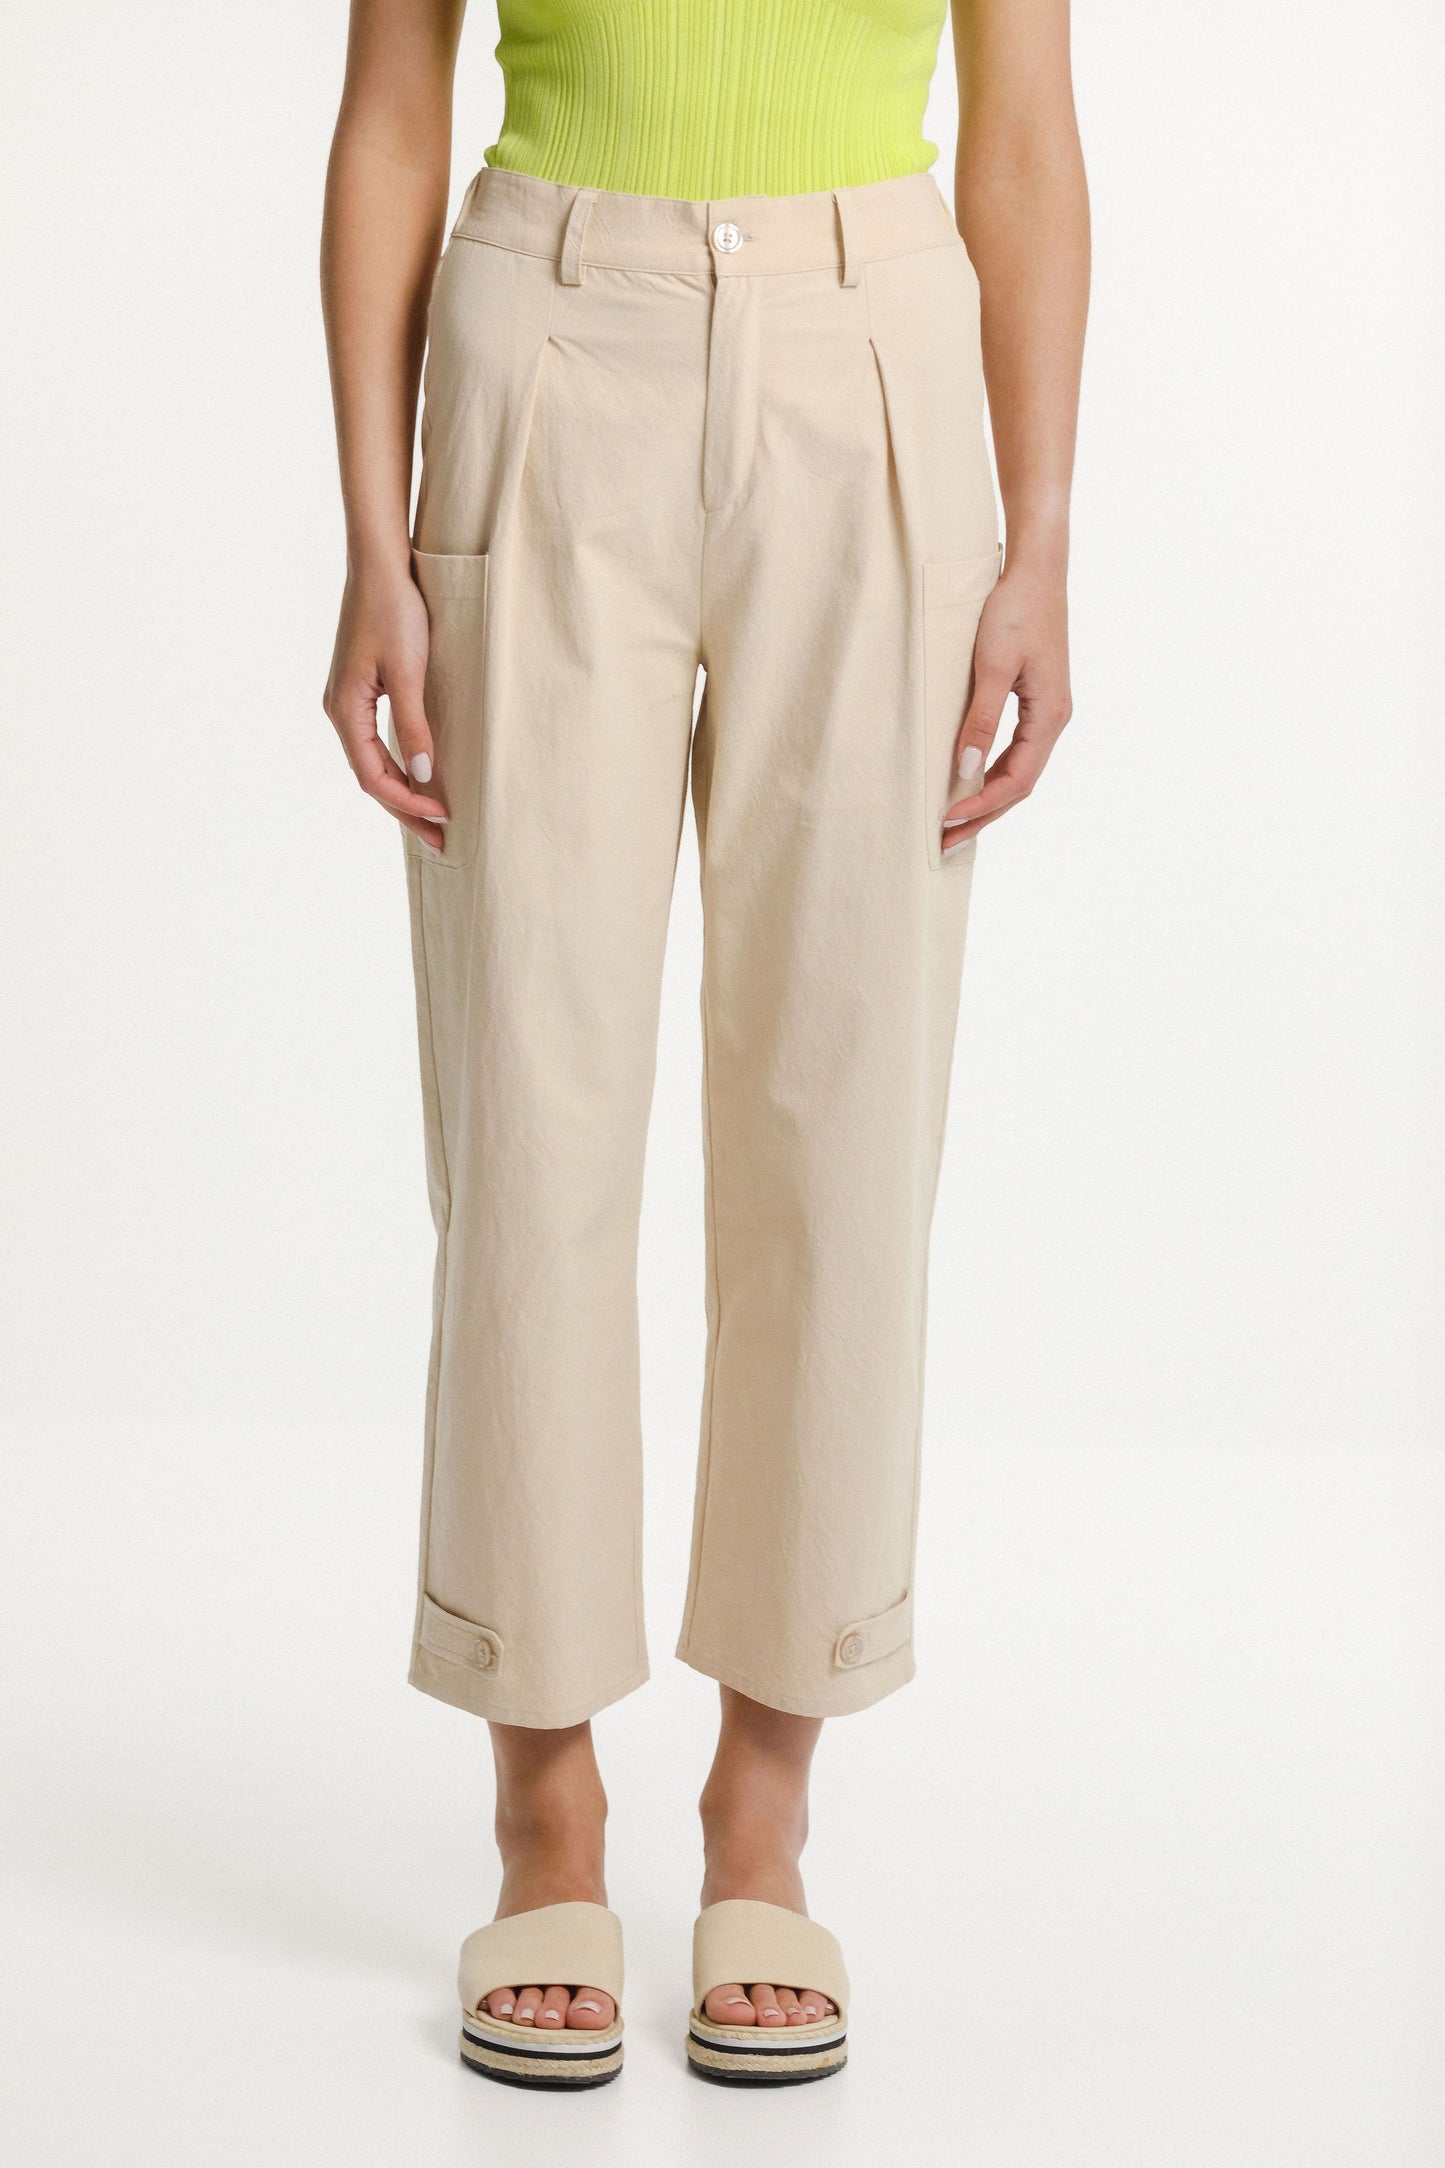 Thing Thing Smartie Pant | Latte